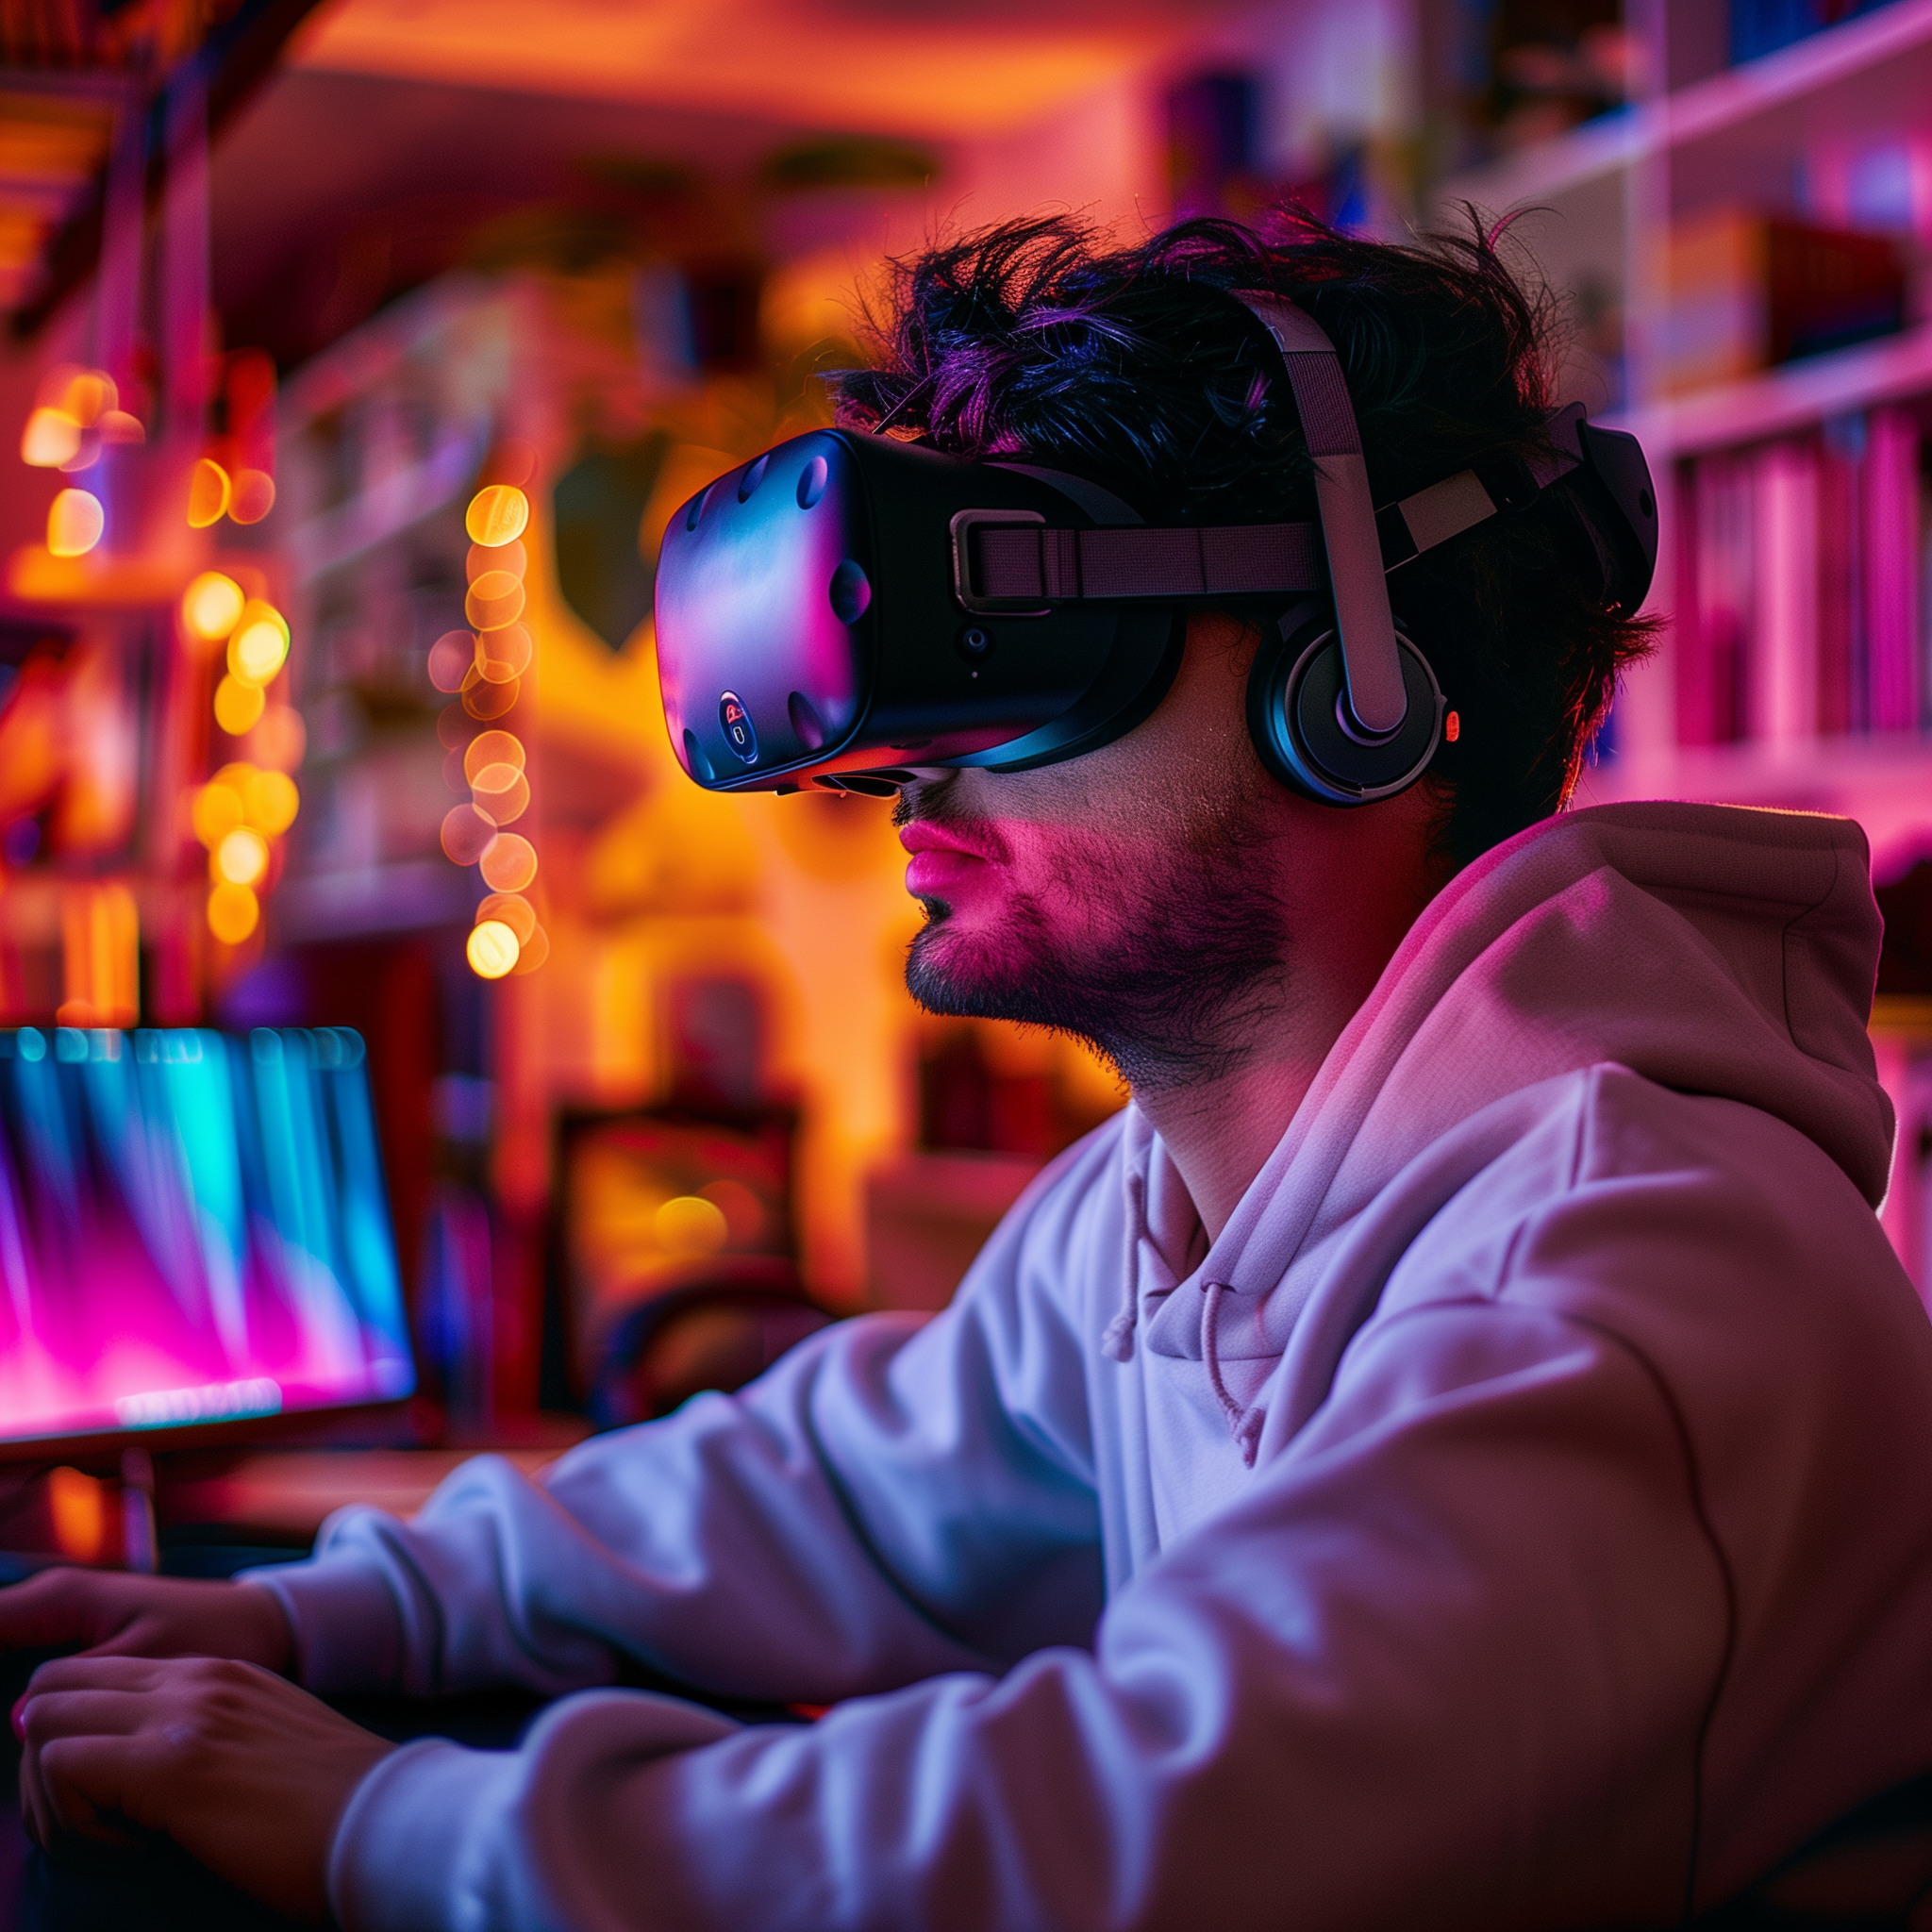 A person wearing a VR set and playing a game. Remember, the key lies in understanding how AR and VR can enhance your app's core functionalities and create truly immersive experiences.